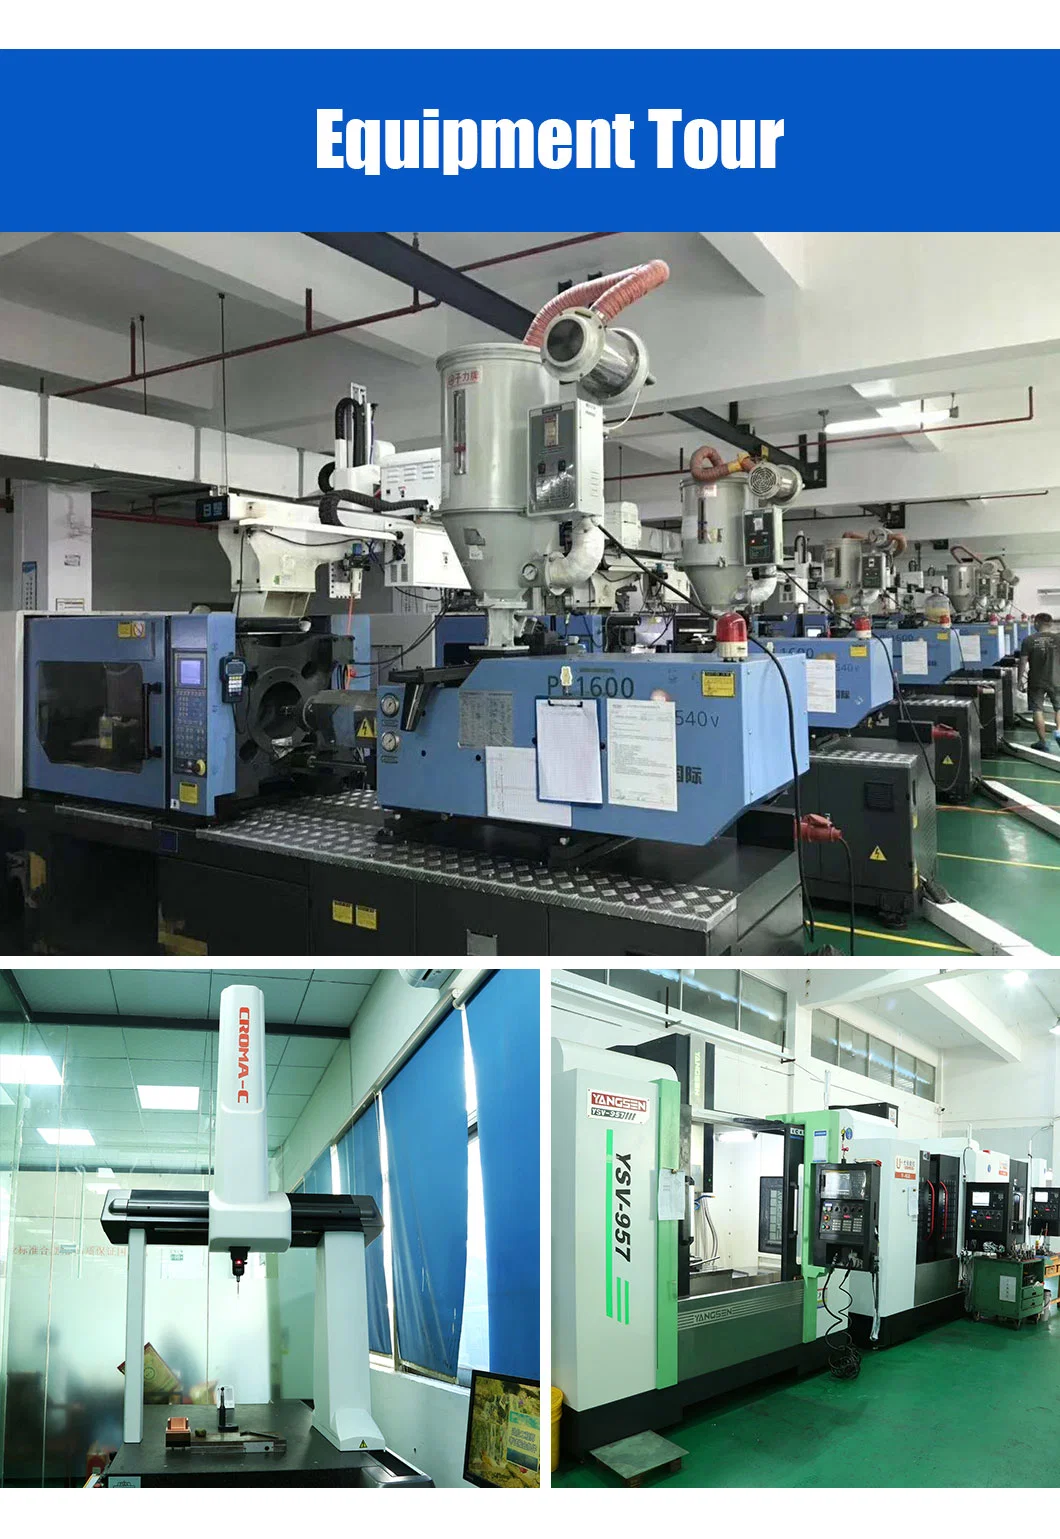 Quality Plastic Molding Company Matrix Injection Molds for Home Use Motorcycle